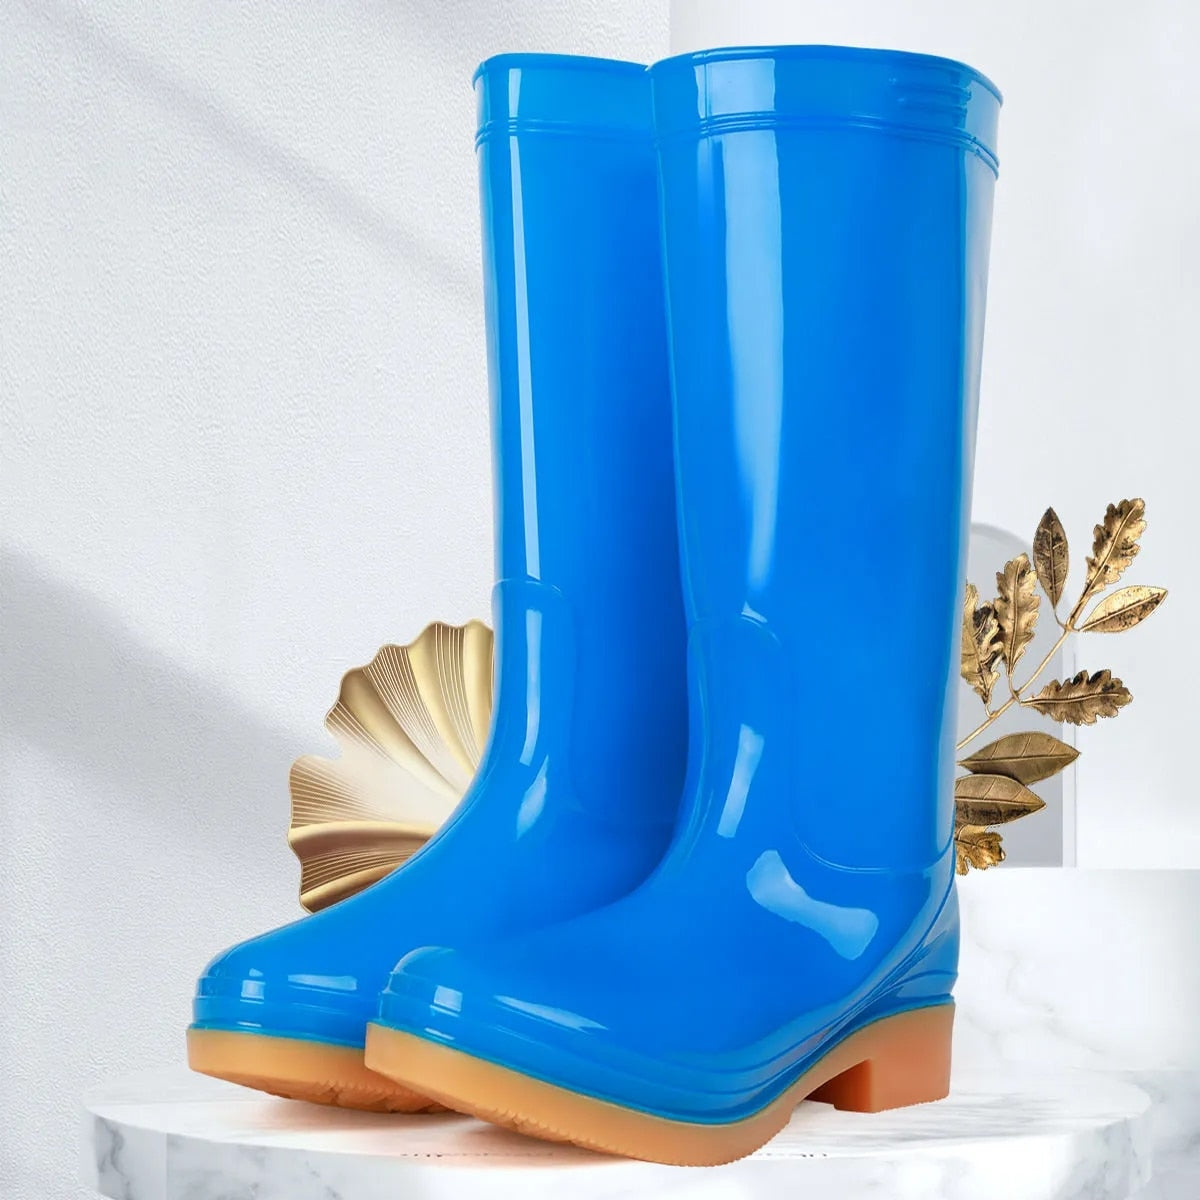 Women High Rain Boots Solid Color Waterproof Anti Slip Work Rubber Long Water Shoes - WRB50111